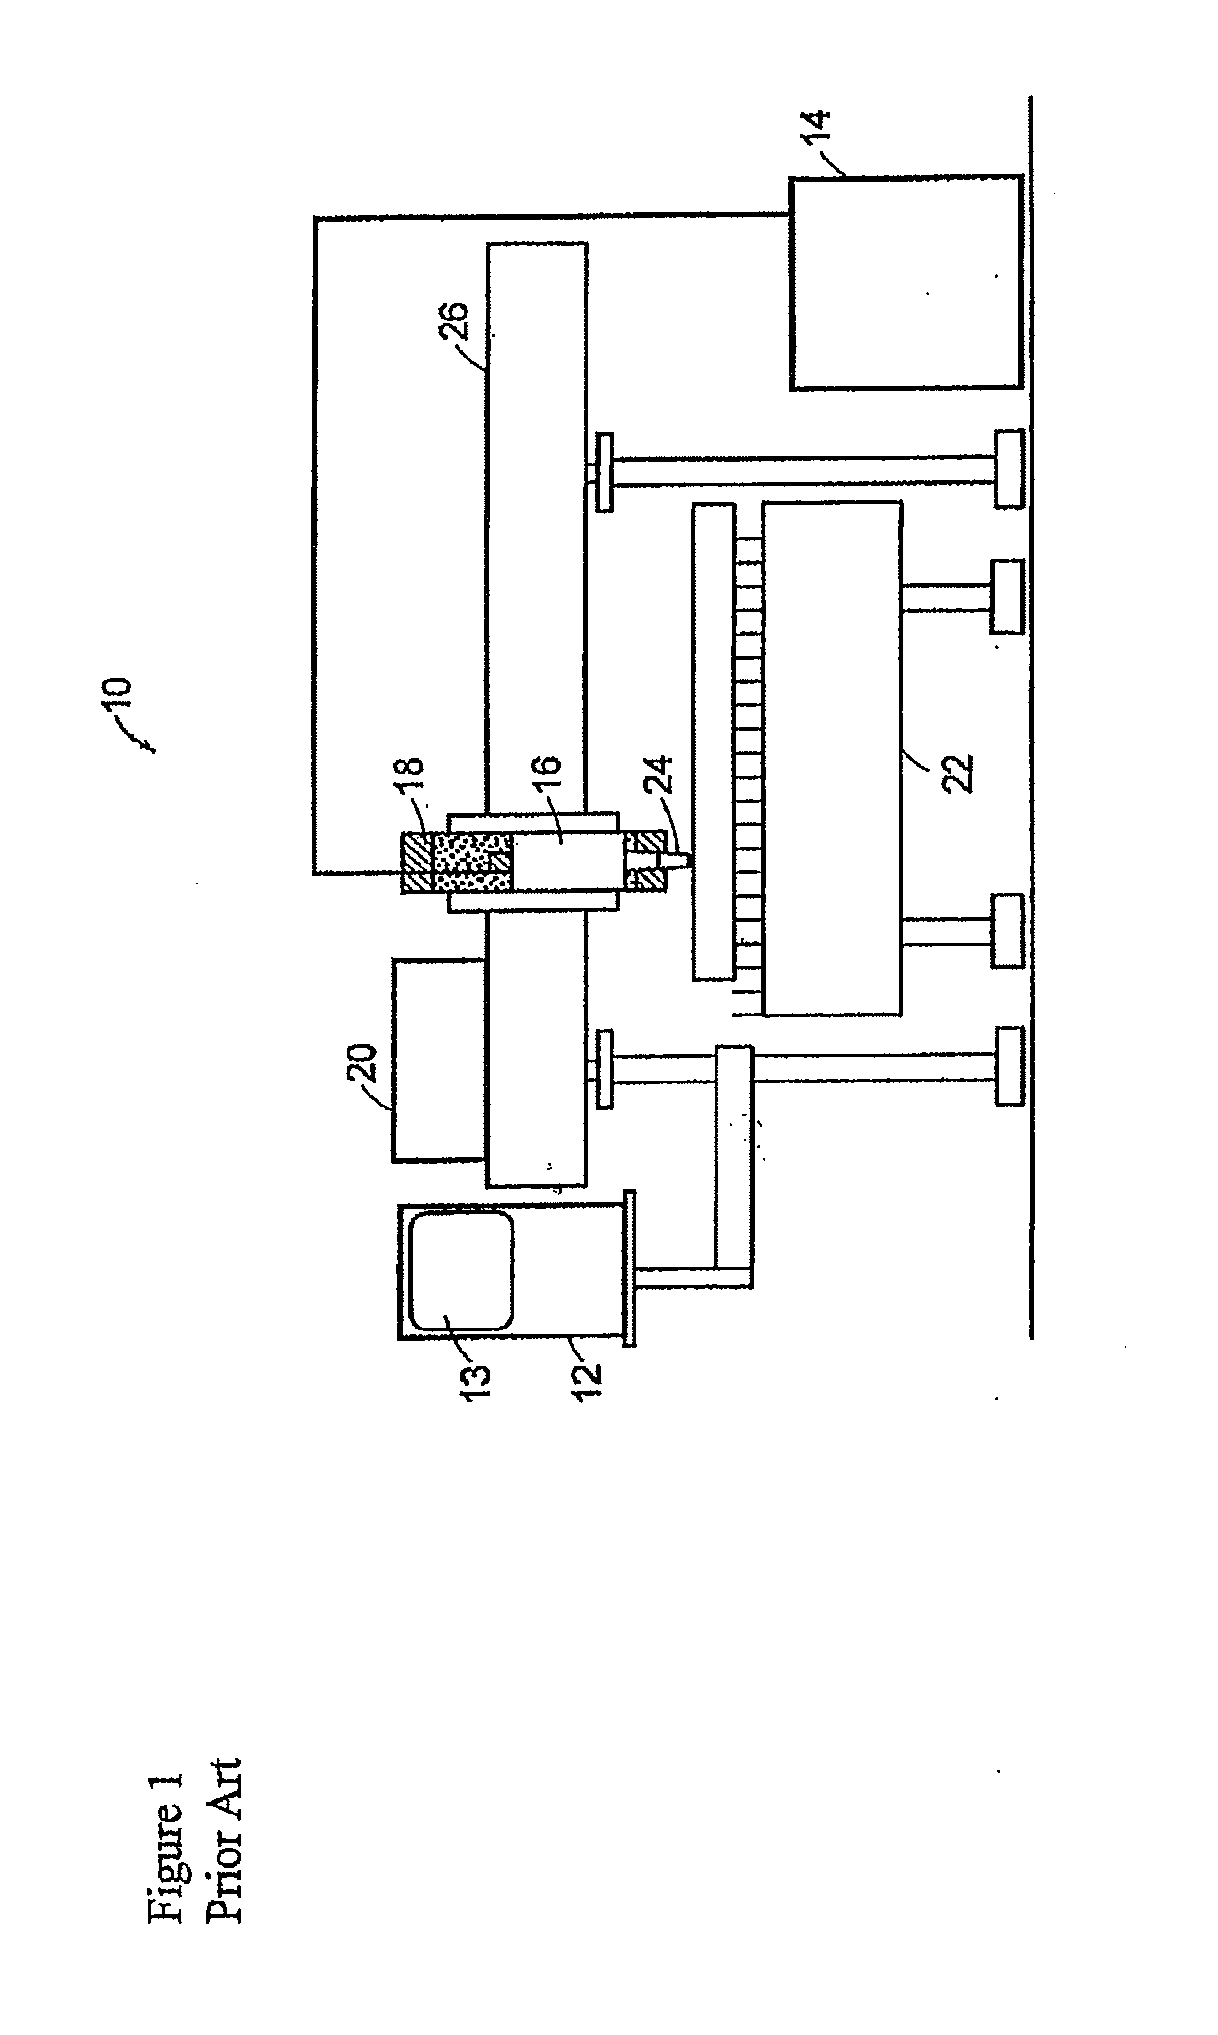 High quality hole cutting using variable shield gas compositions